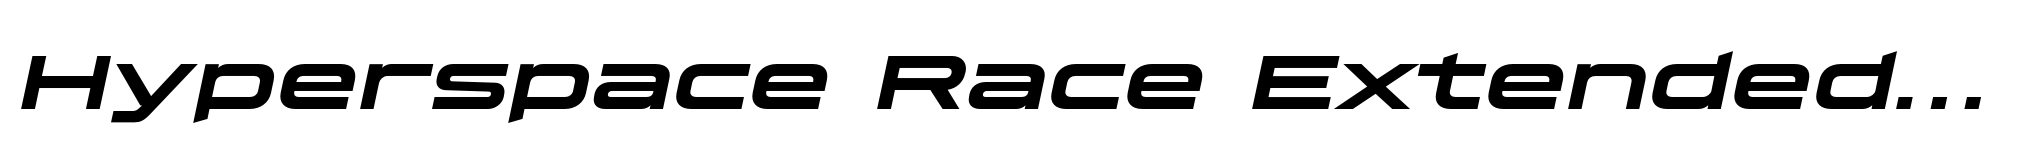 Hyperspace Race Extended Bold Italic image